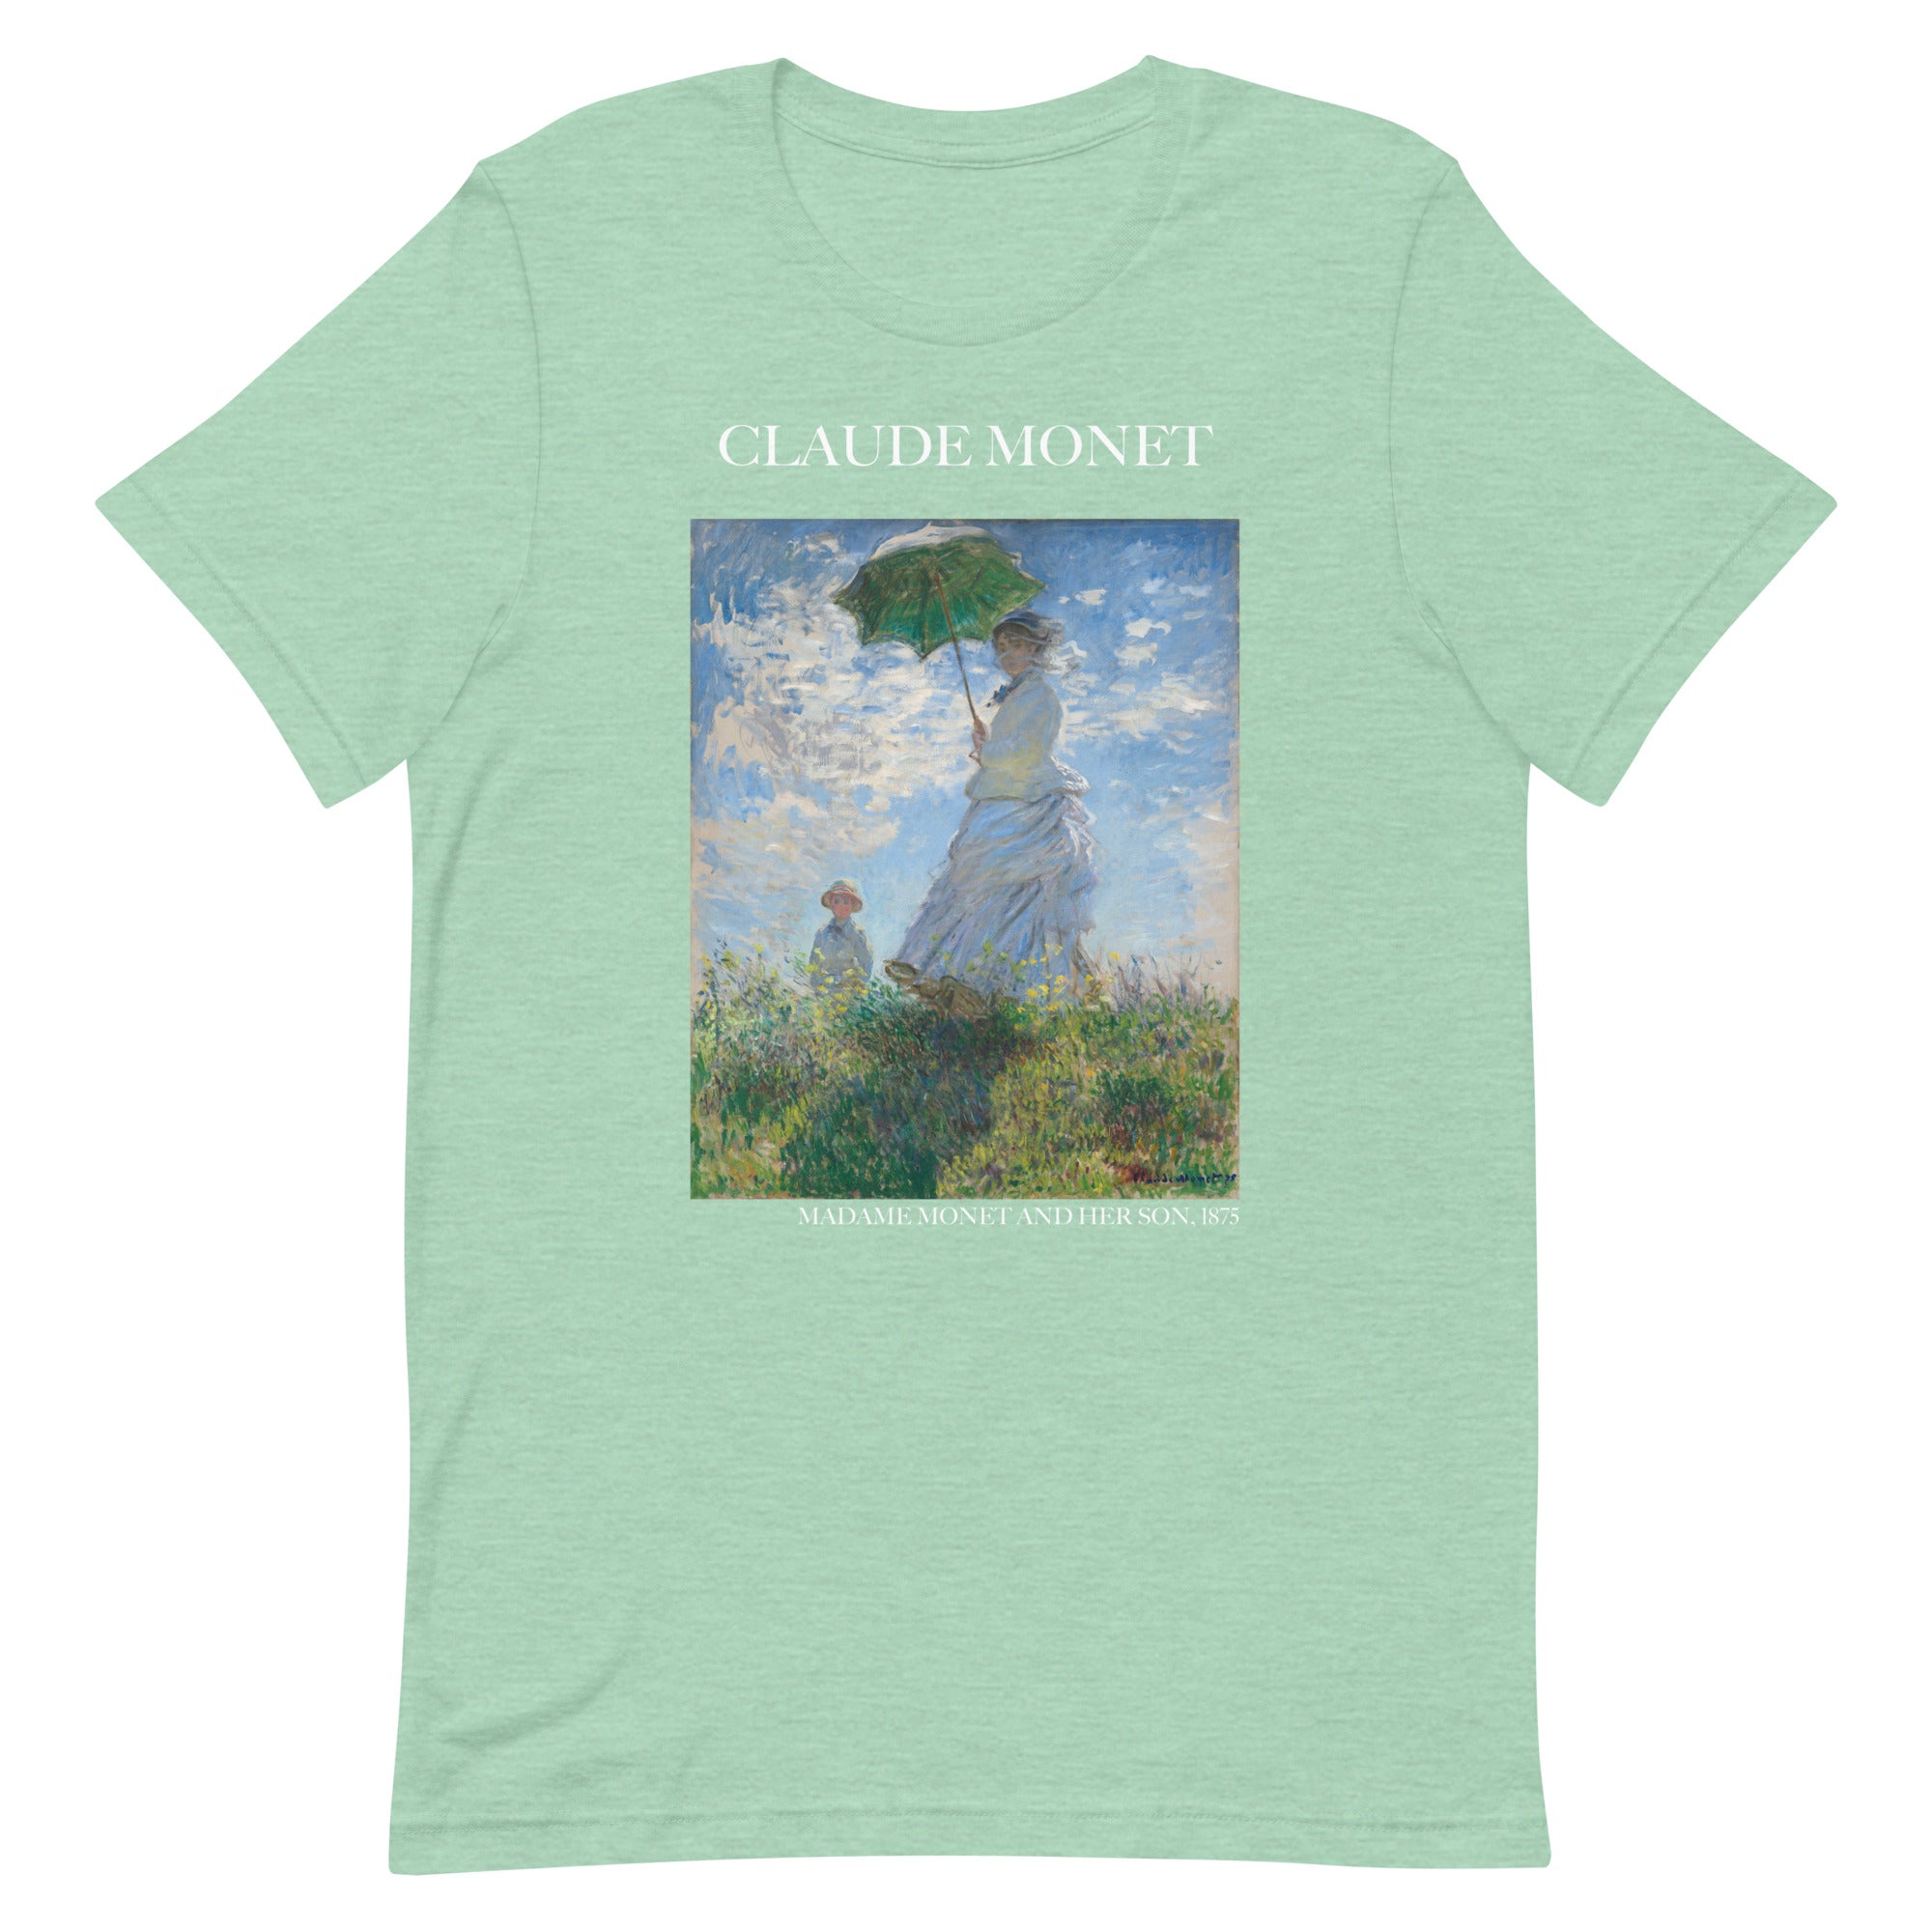 Claude Monet 'Madame Monet and Her Son' Famous Painting T-Shirt | Unisex Classic Art Tee